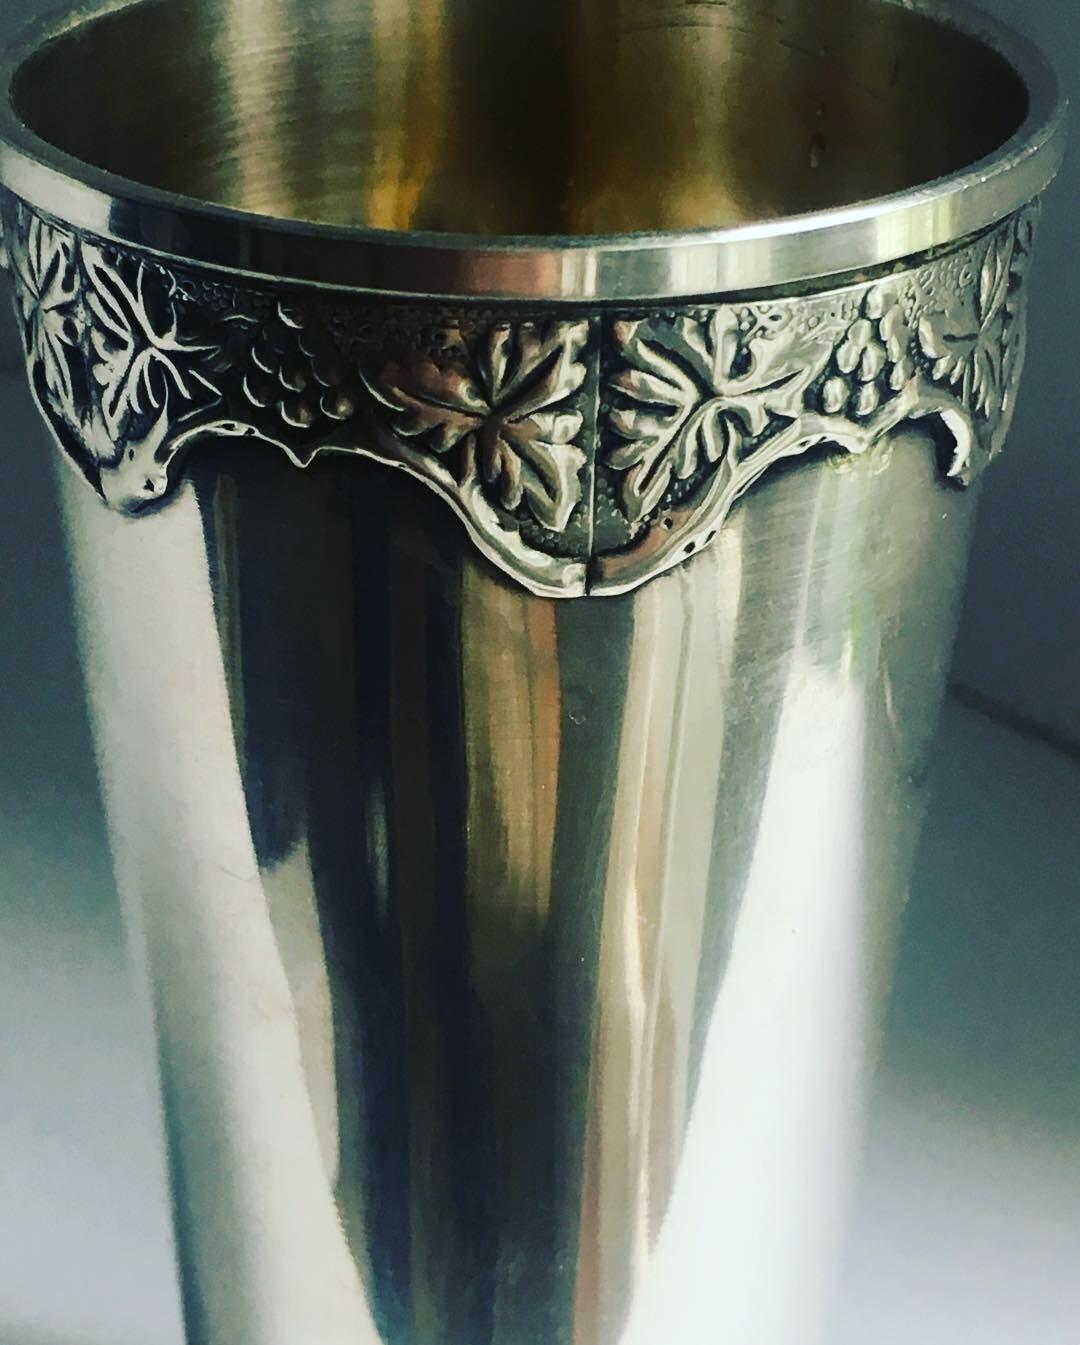 Sterling silver bud vase - simple and sophisticated with a floral border along the top edge... this piece is a handsome compliment to any desk table.